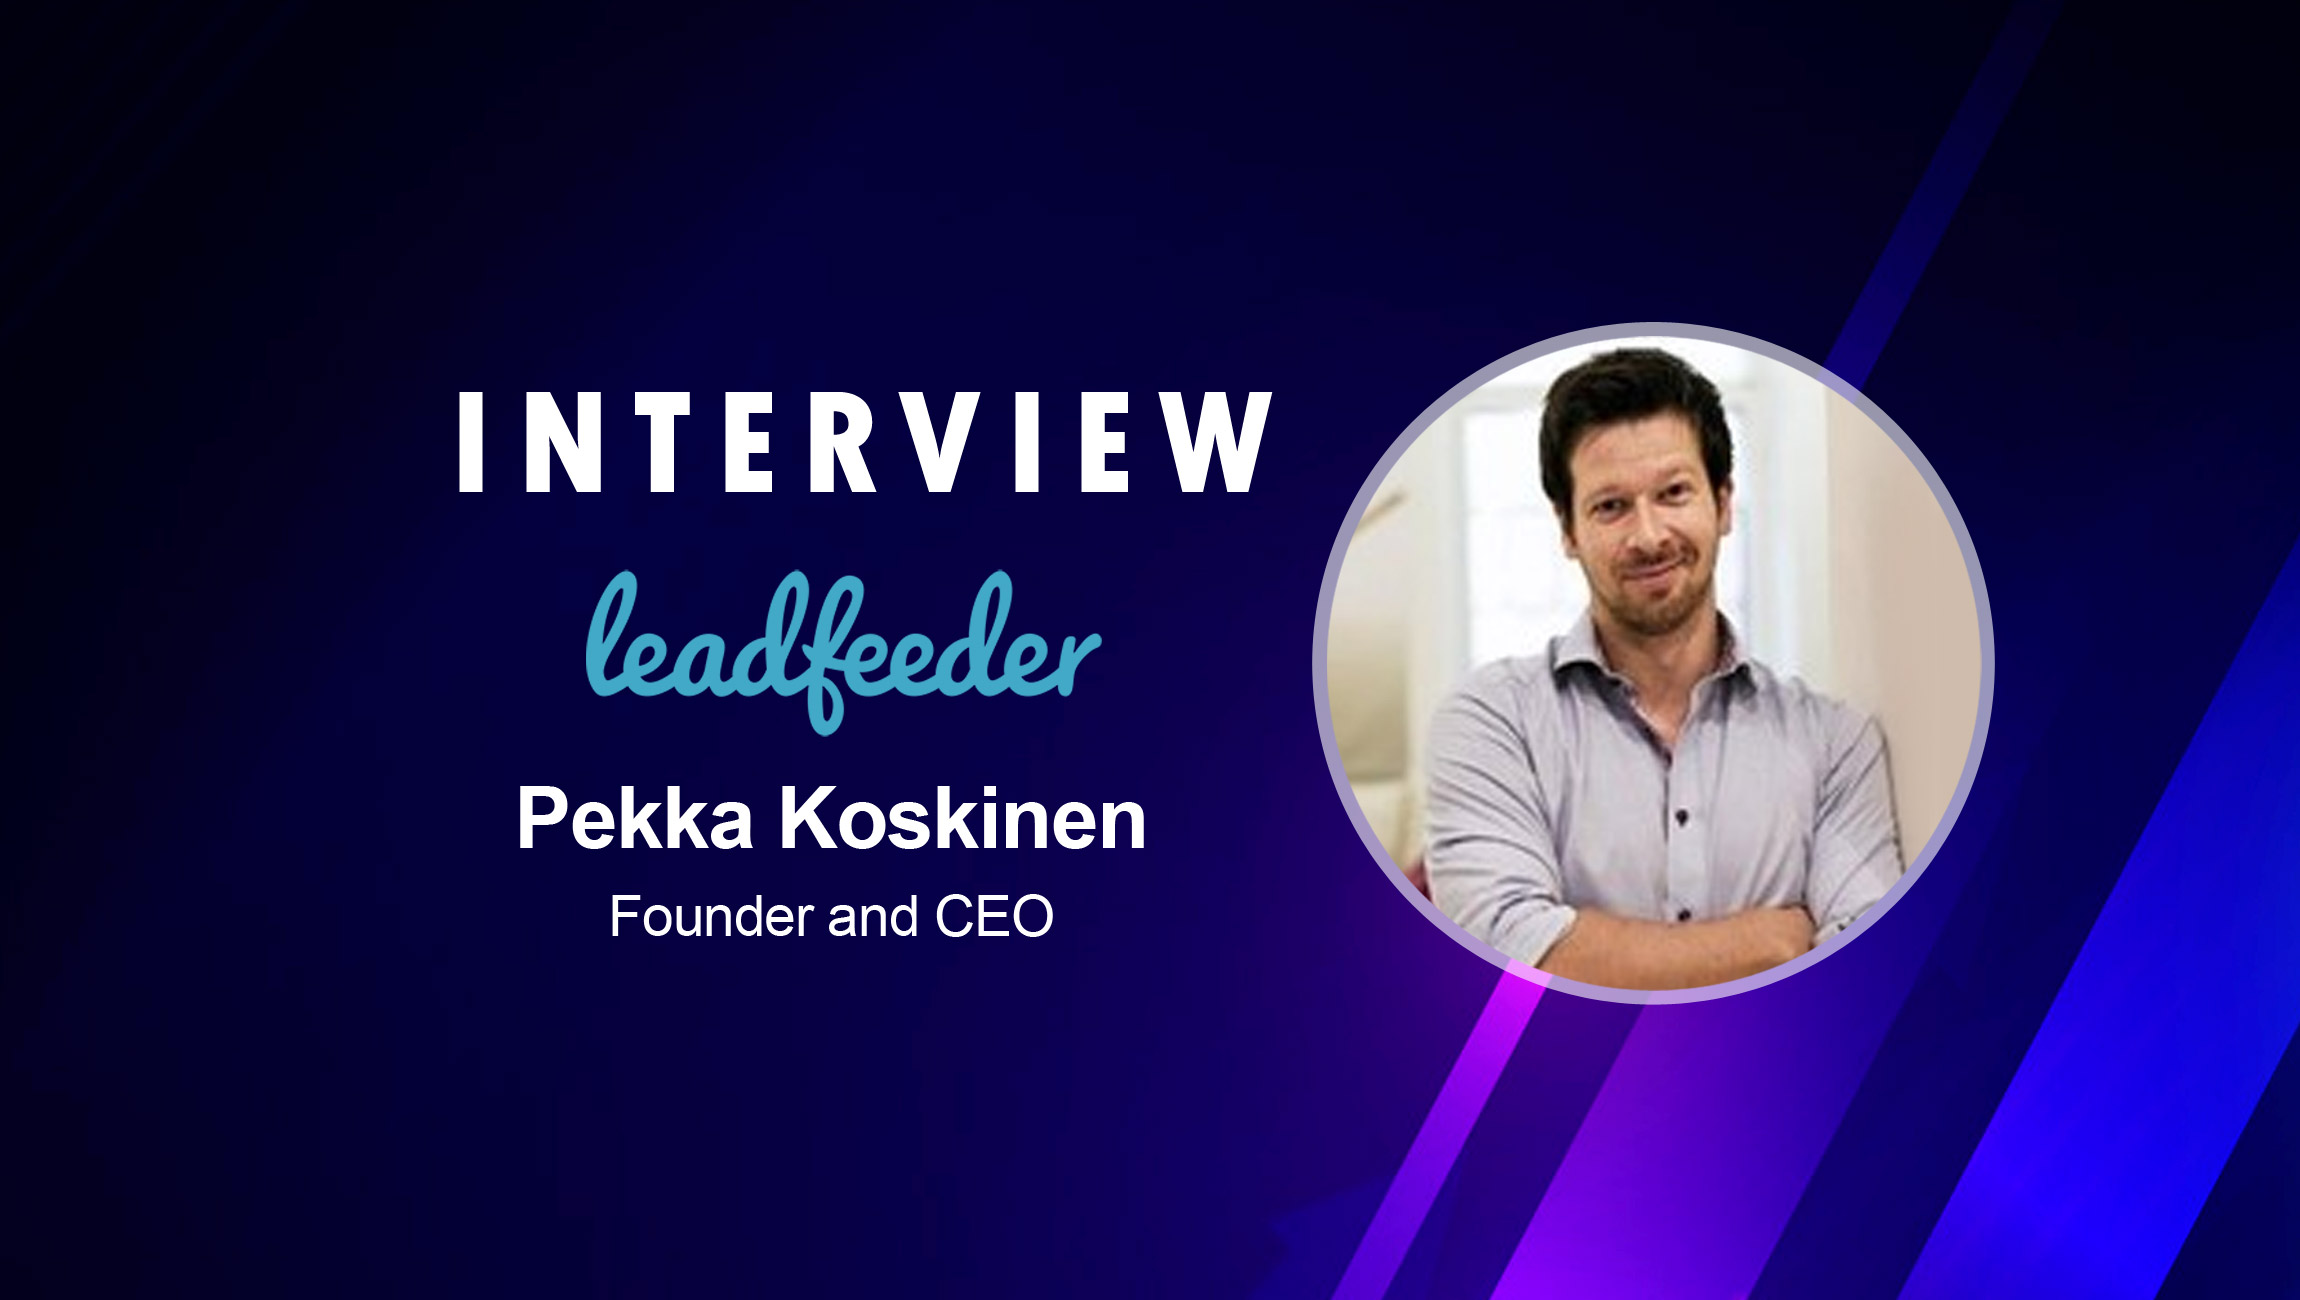 SalesTechStar Interview with Pekka Koskinen, Founder and CEO at Leadfeeder